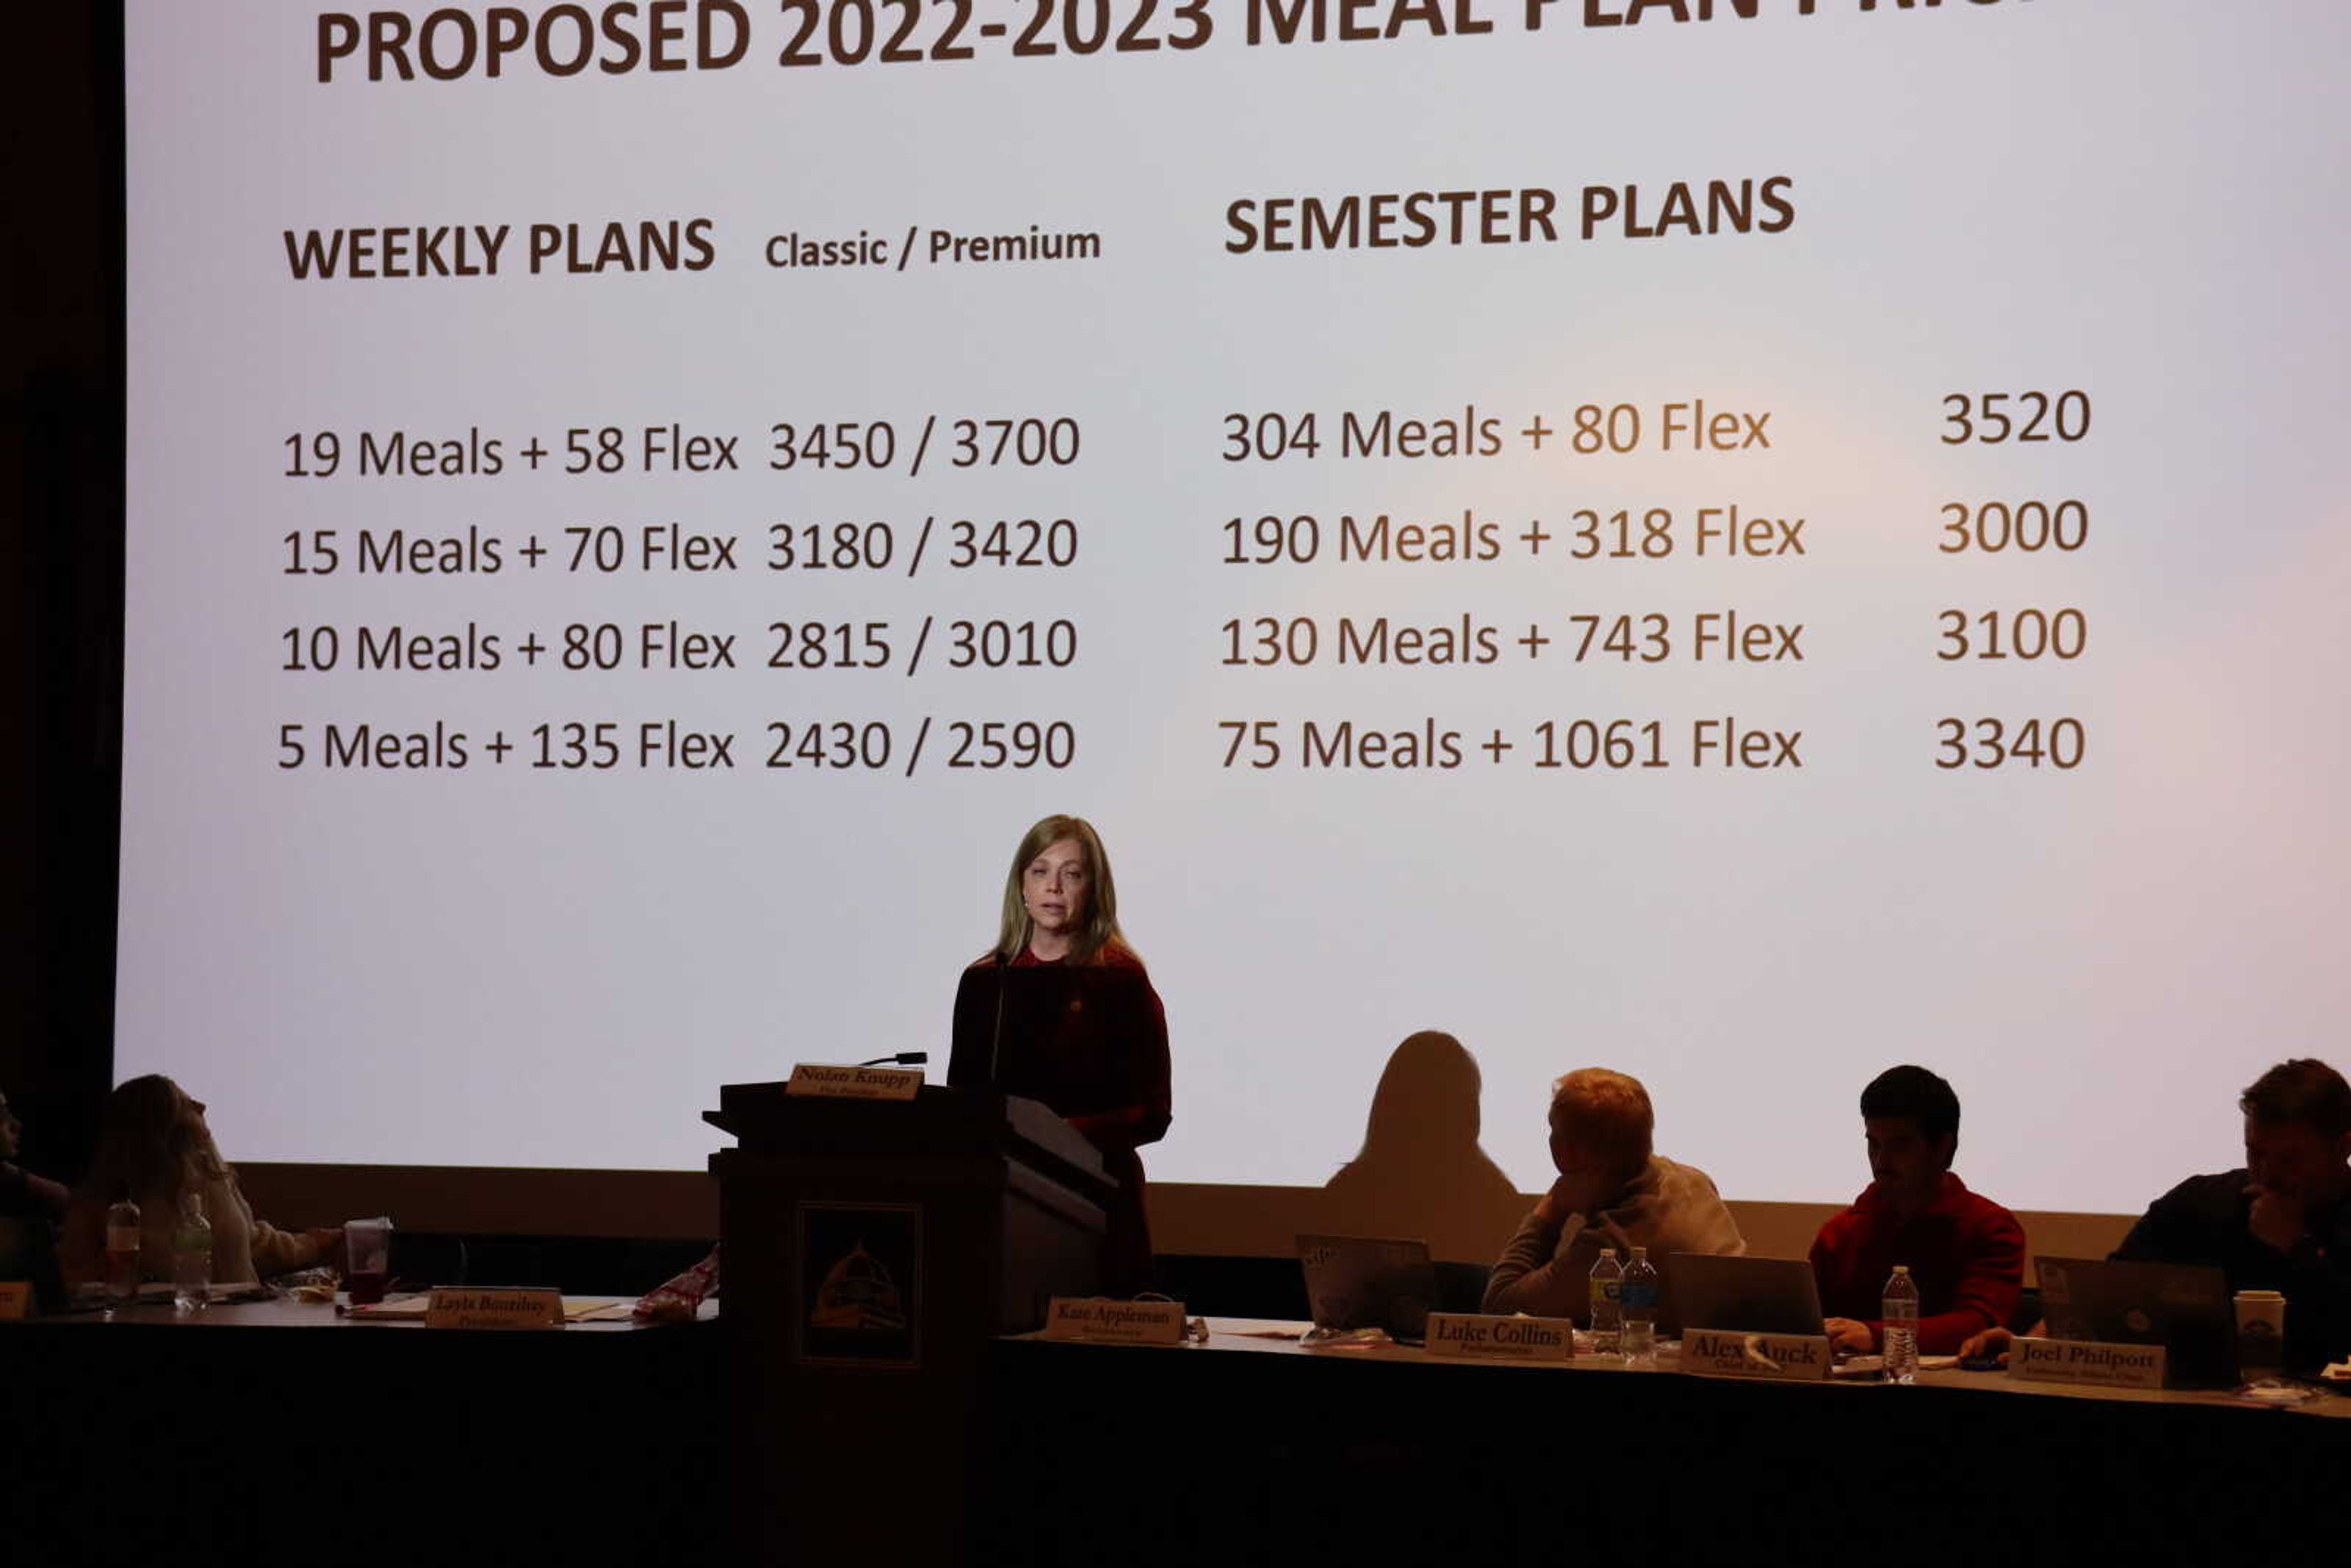 Vice President of Enrollment Management and Student Success Debbie Below shares the new meal plan numbers before Student Government. The image behind reflects the price comparison between the two plans.